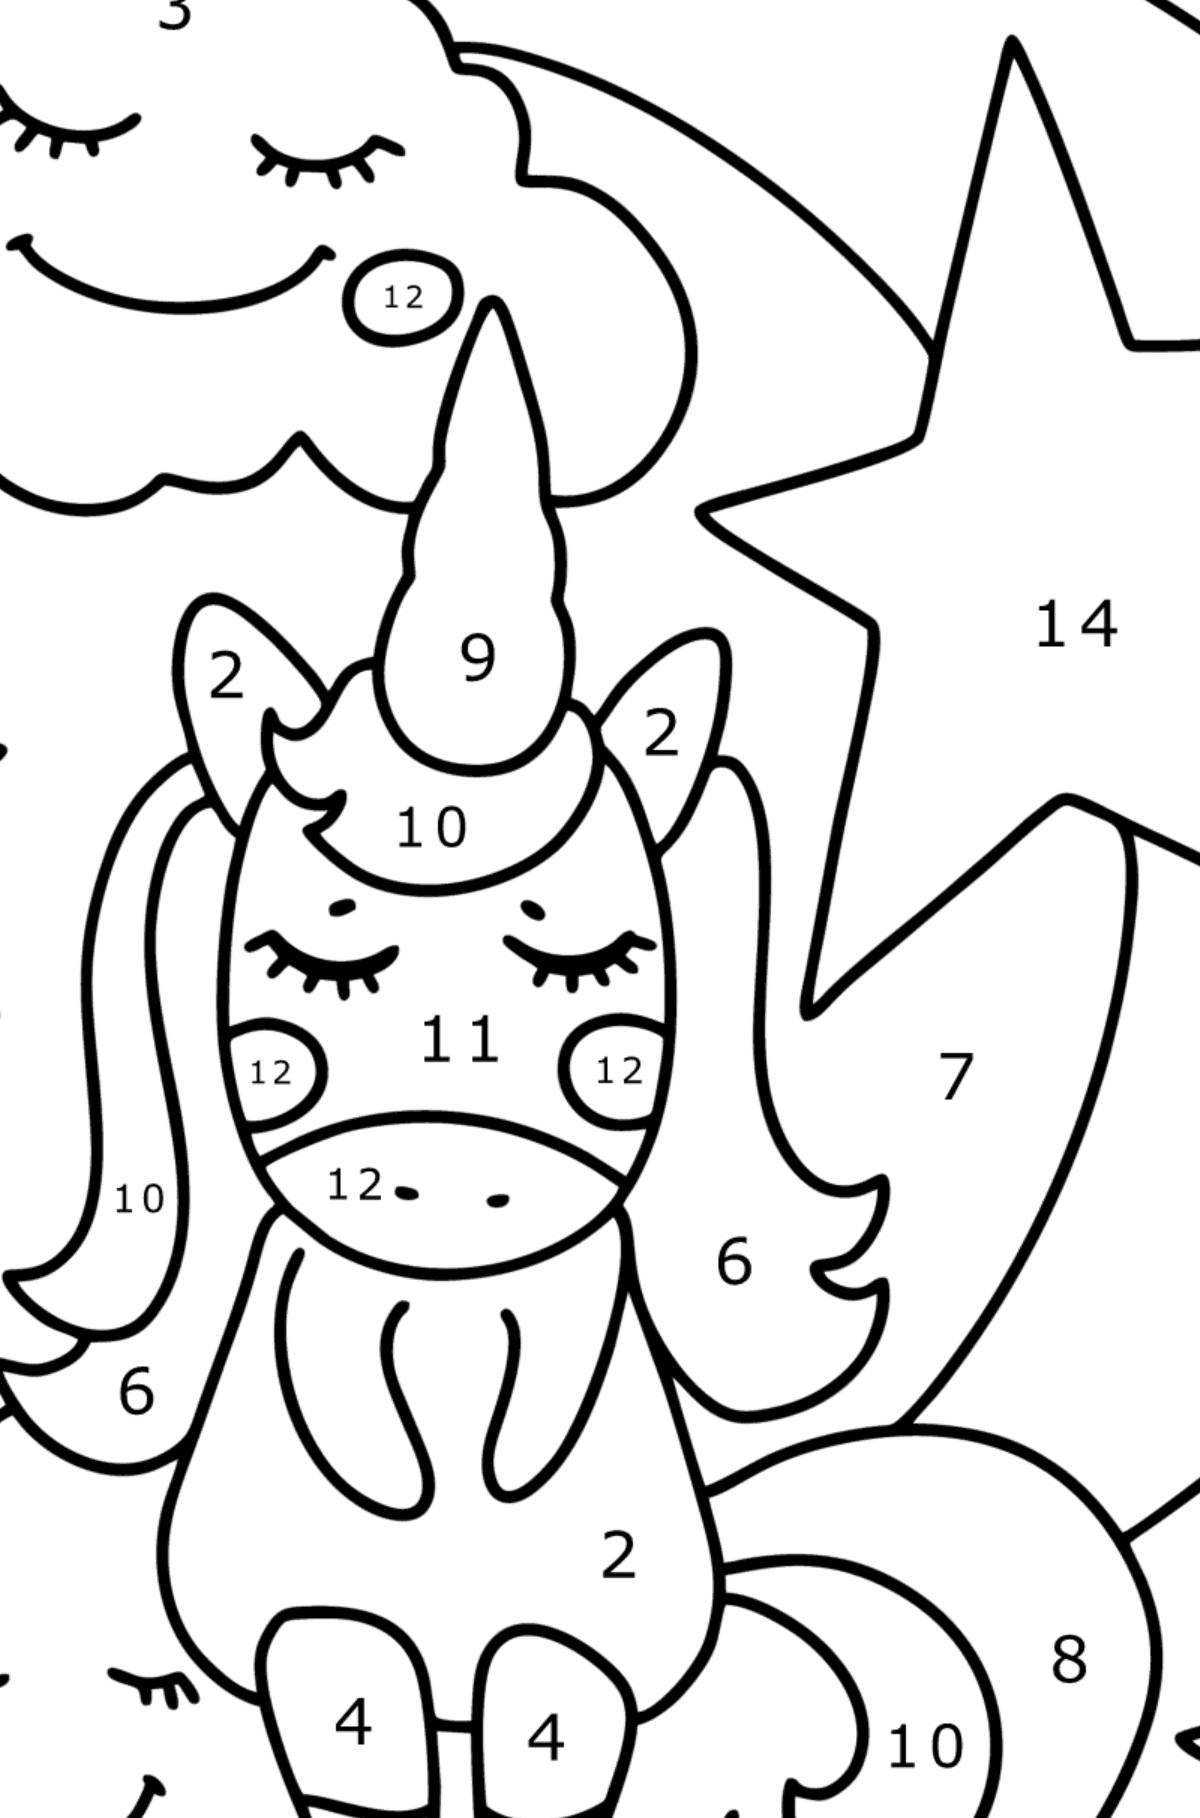 Fun coloring unicorn by numbers for kids